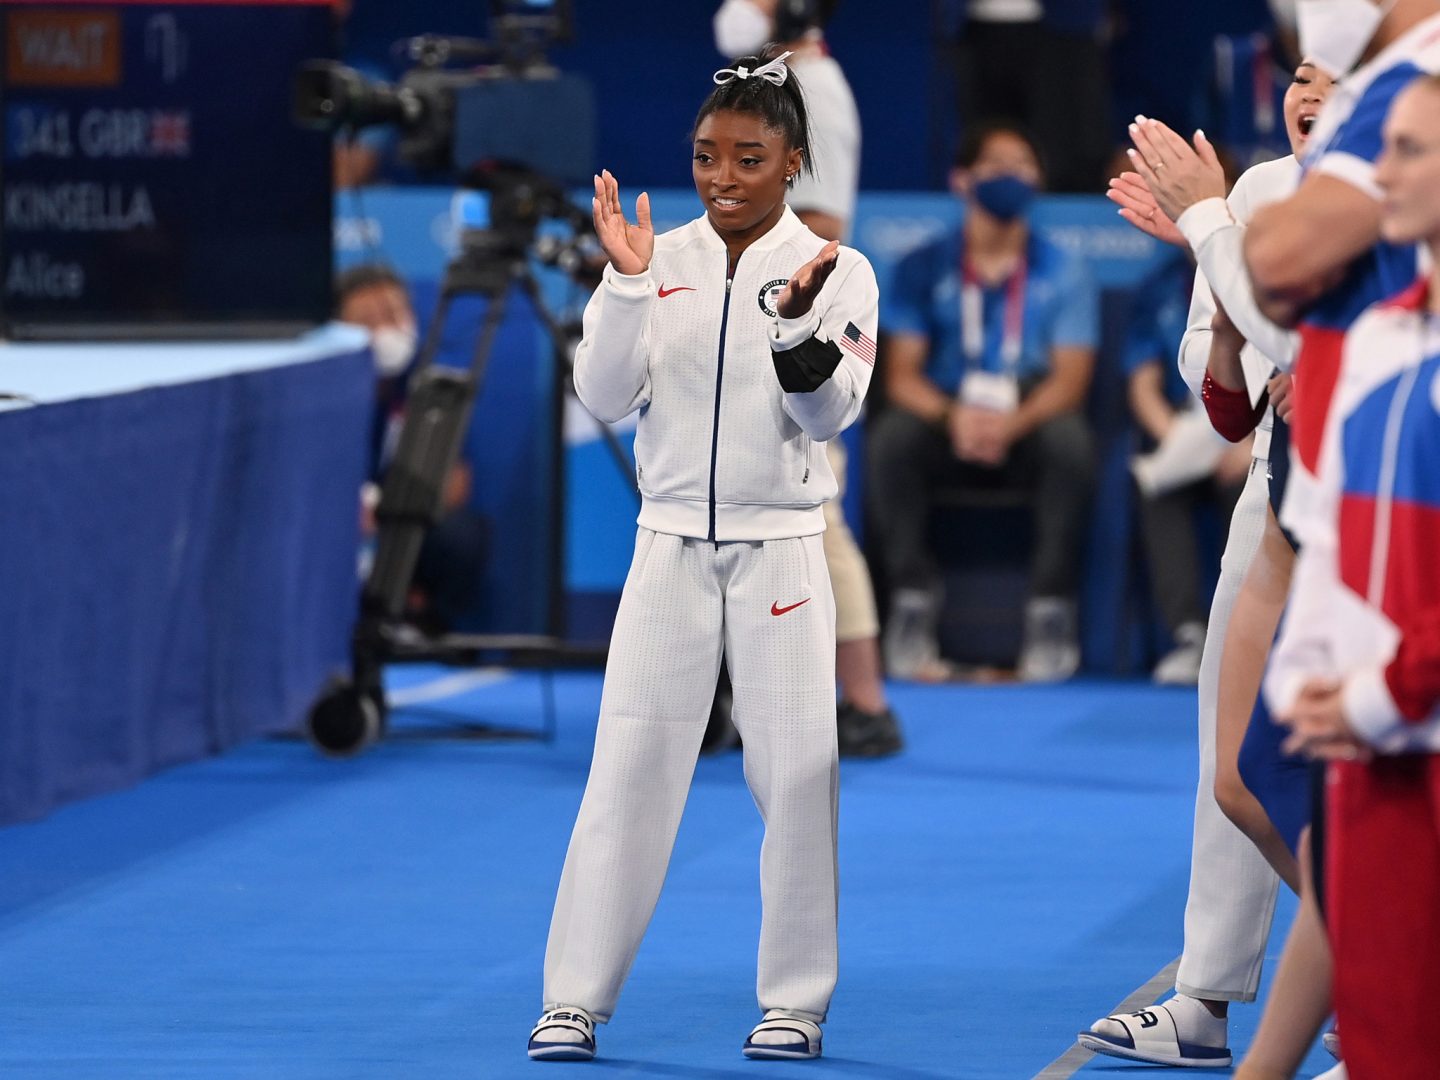 Simone Biles' boyfriend praises her 'strength and courage' after withdrawal